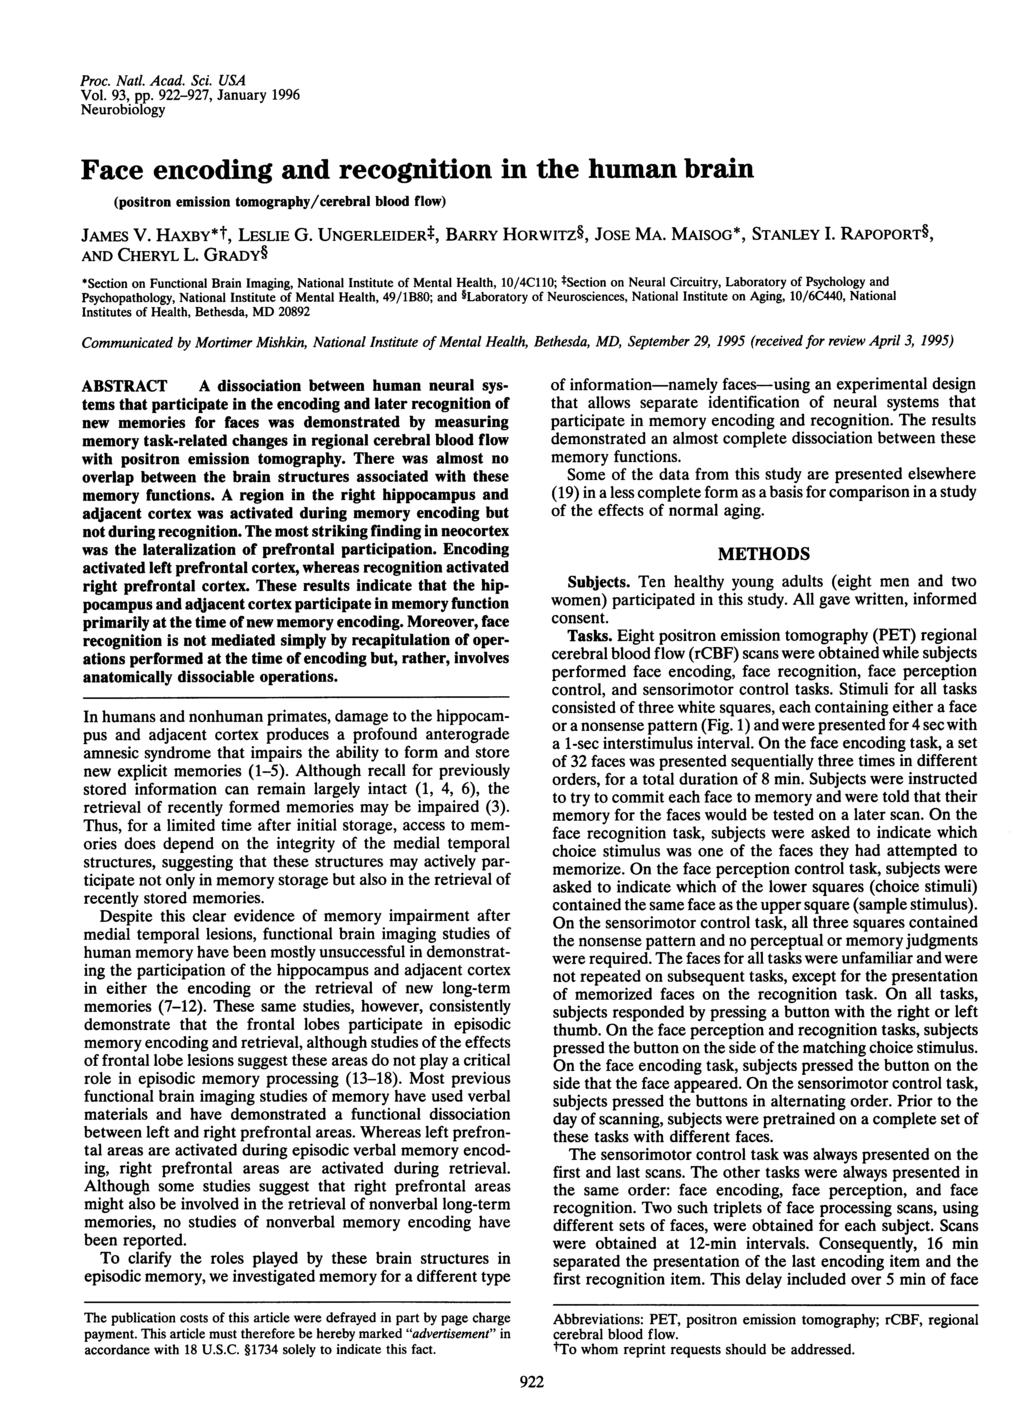 Proc. Natl. Acad. Sci. USA Vol. 93, pp. 922-927, January 1996 Neurobiology Face encoding and recognition in the human brain (positron emission tomography/cerebral blood flow) JAMES V.